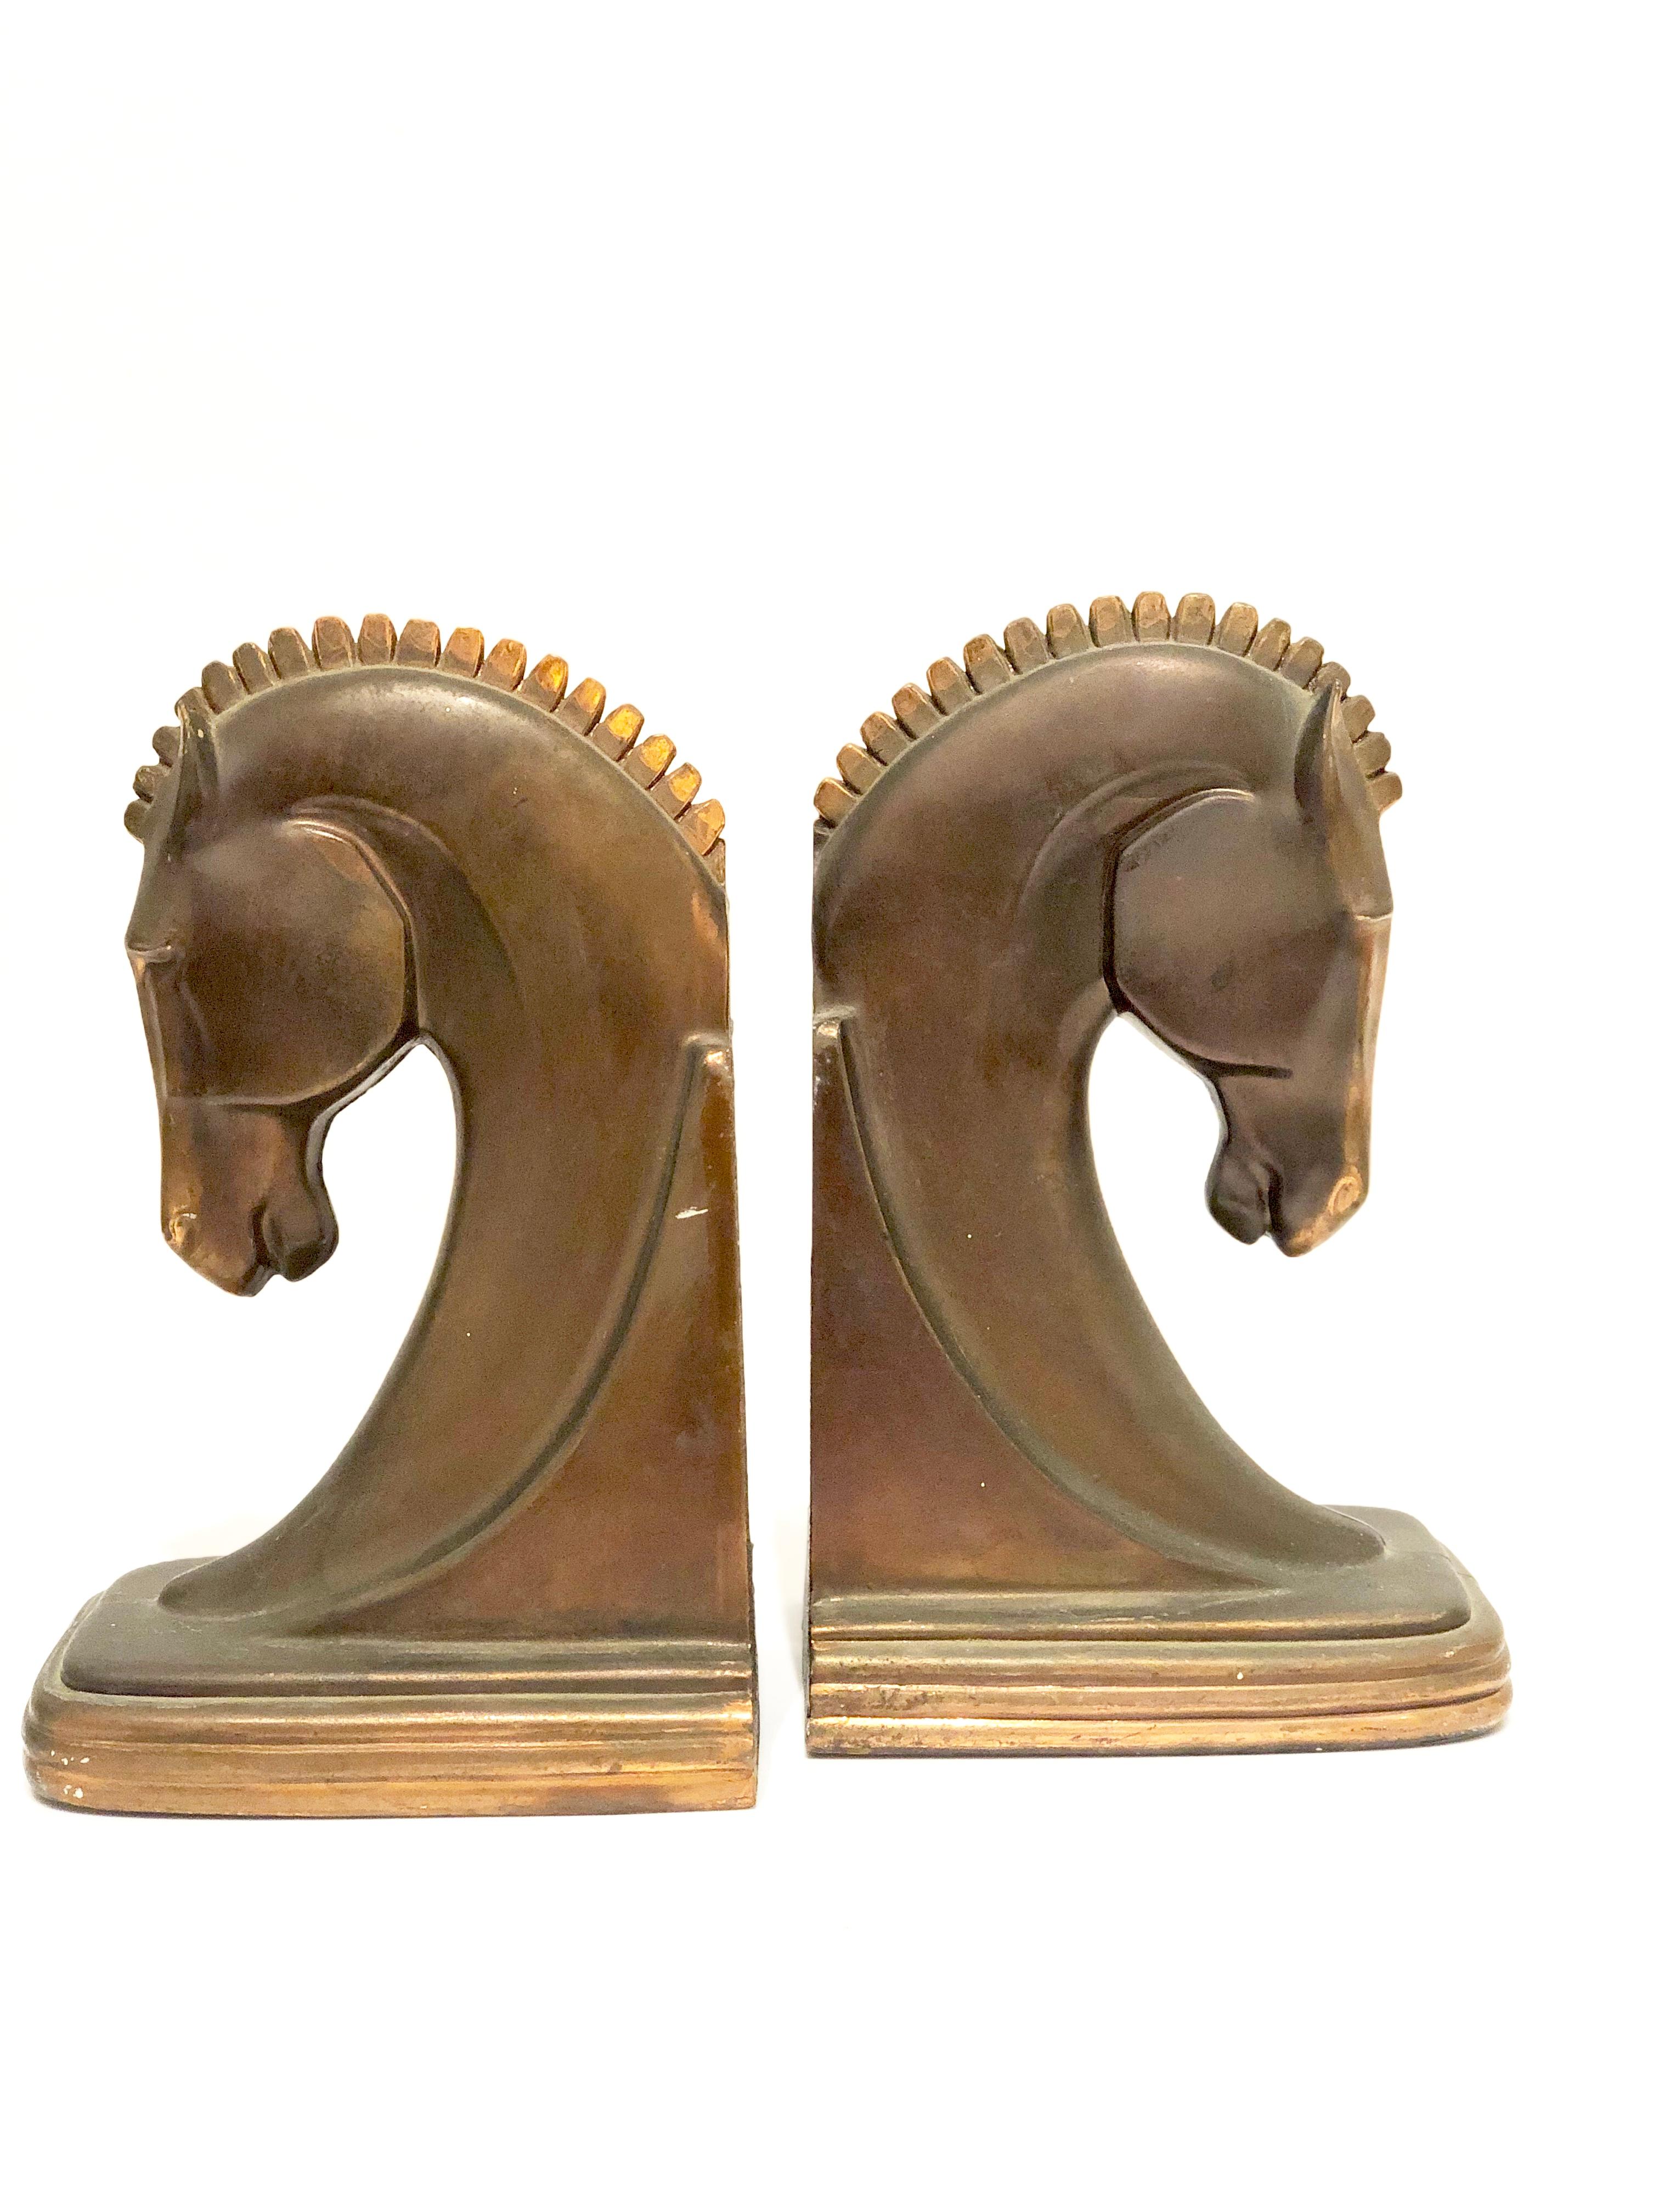 Beautiful and rare pair of bookends in original patinated bronze finish, the pair can be polished but we are selling them in its original finish and patina.